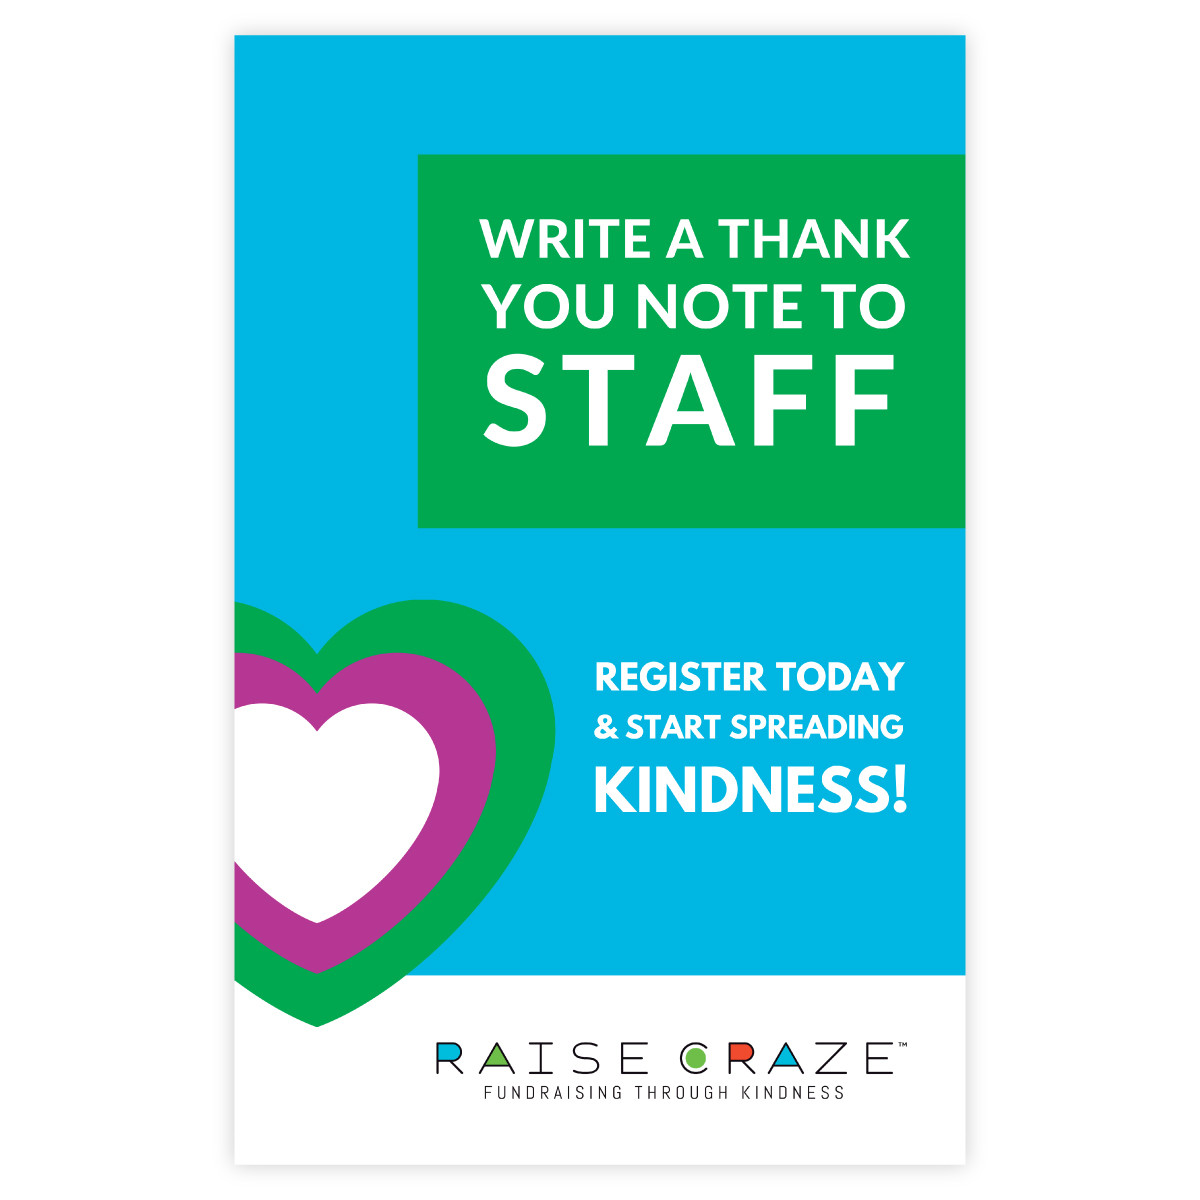 Raise Craze Poster - Write a Thank You Note to Staff